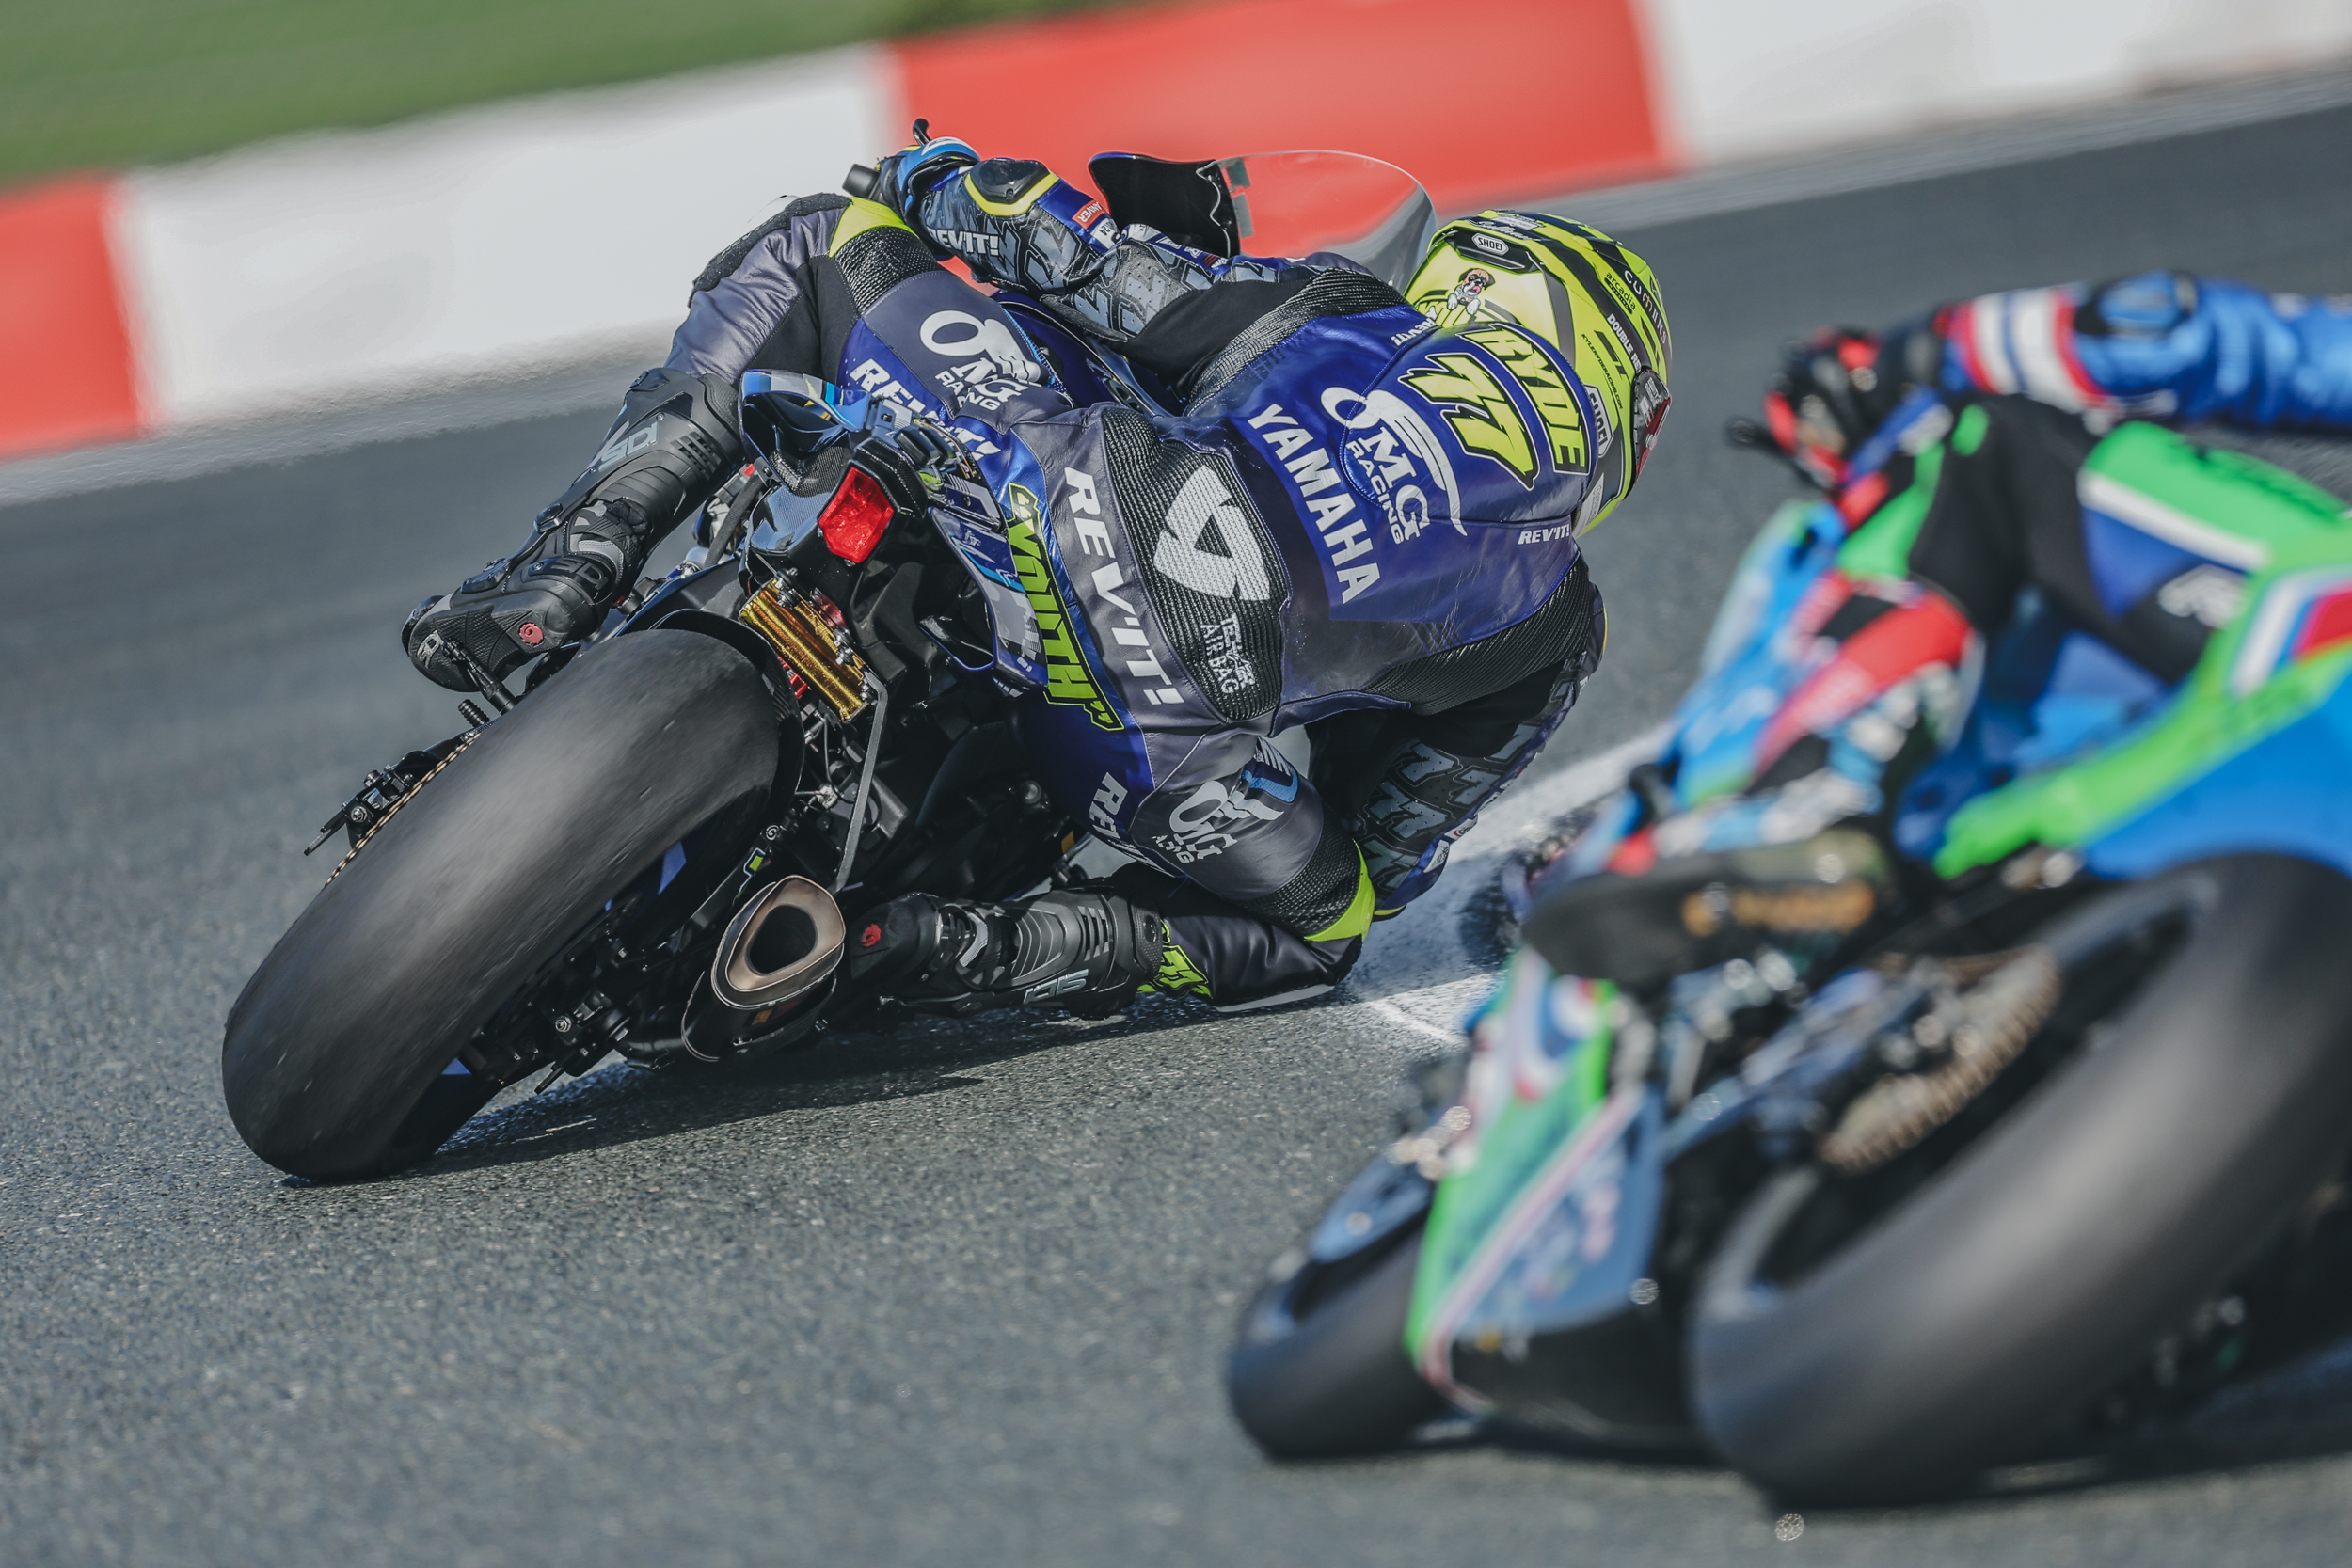 Bennetts Bsb Teams Conclude Successful Test At Circuito De Navarra Despite Final Session Incident